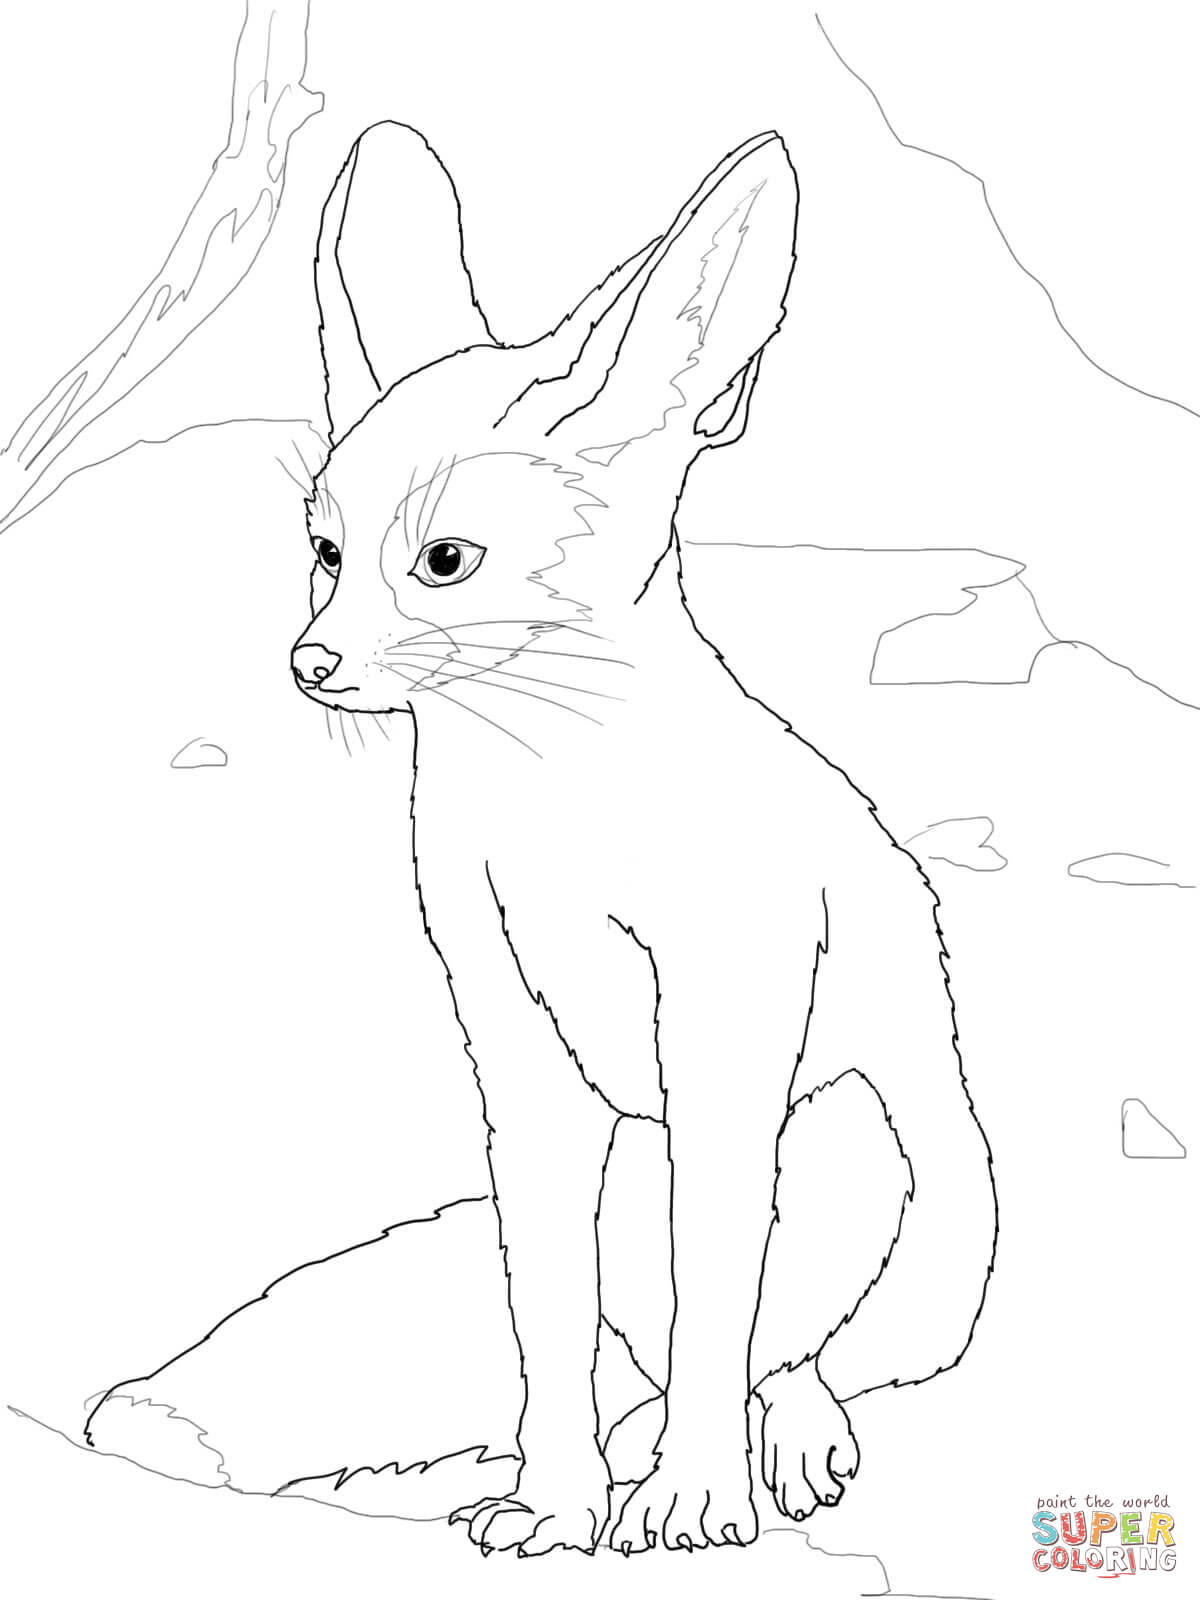 Fennec fox coloring pages | Free Coloring Pages